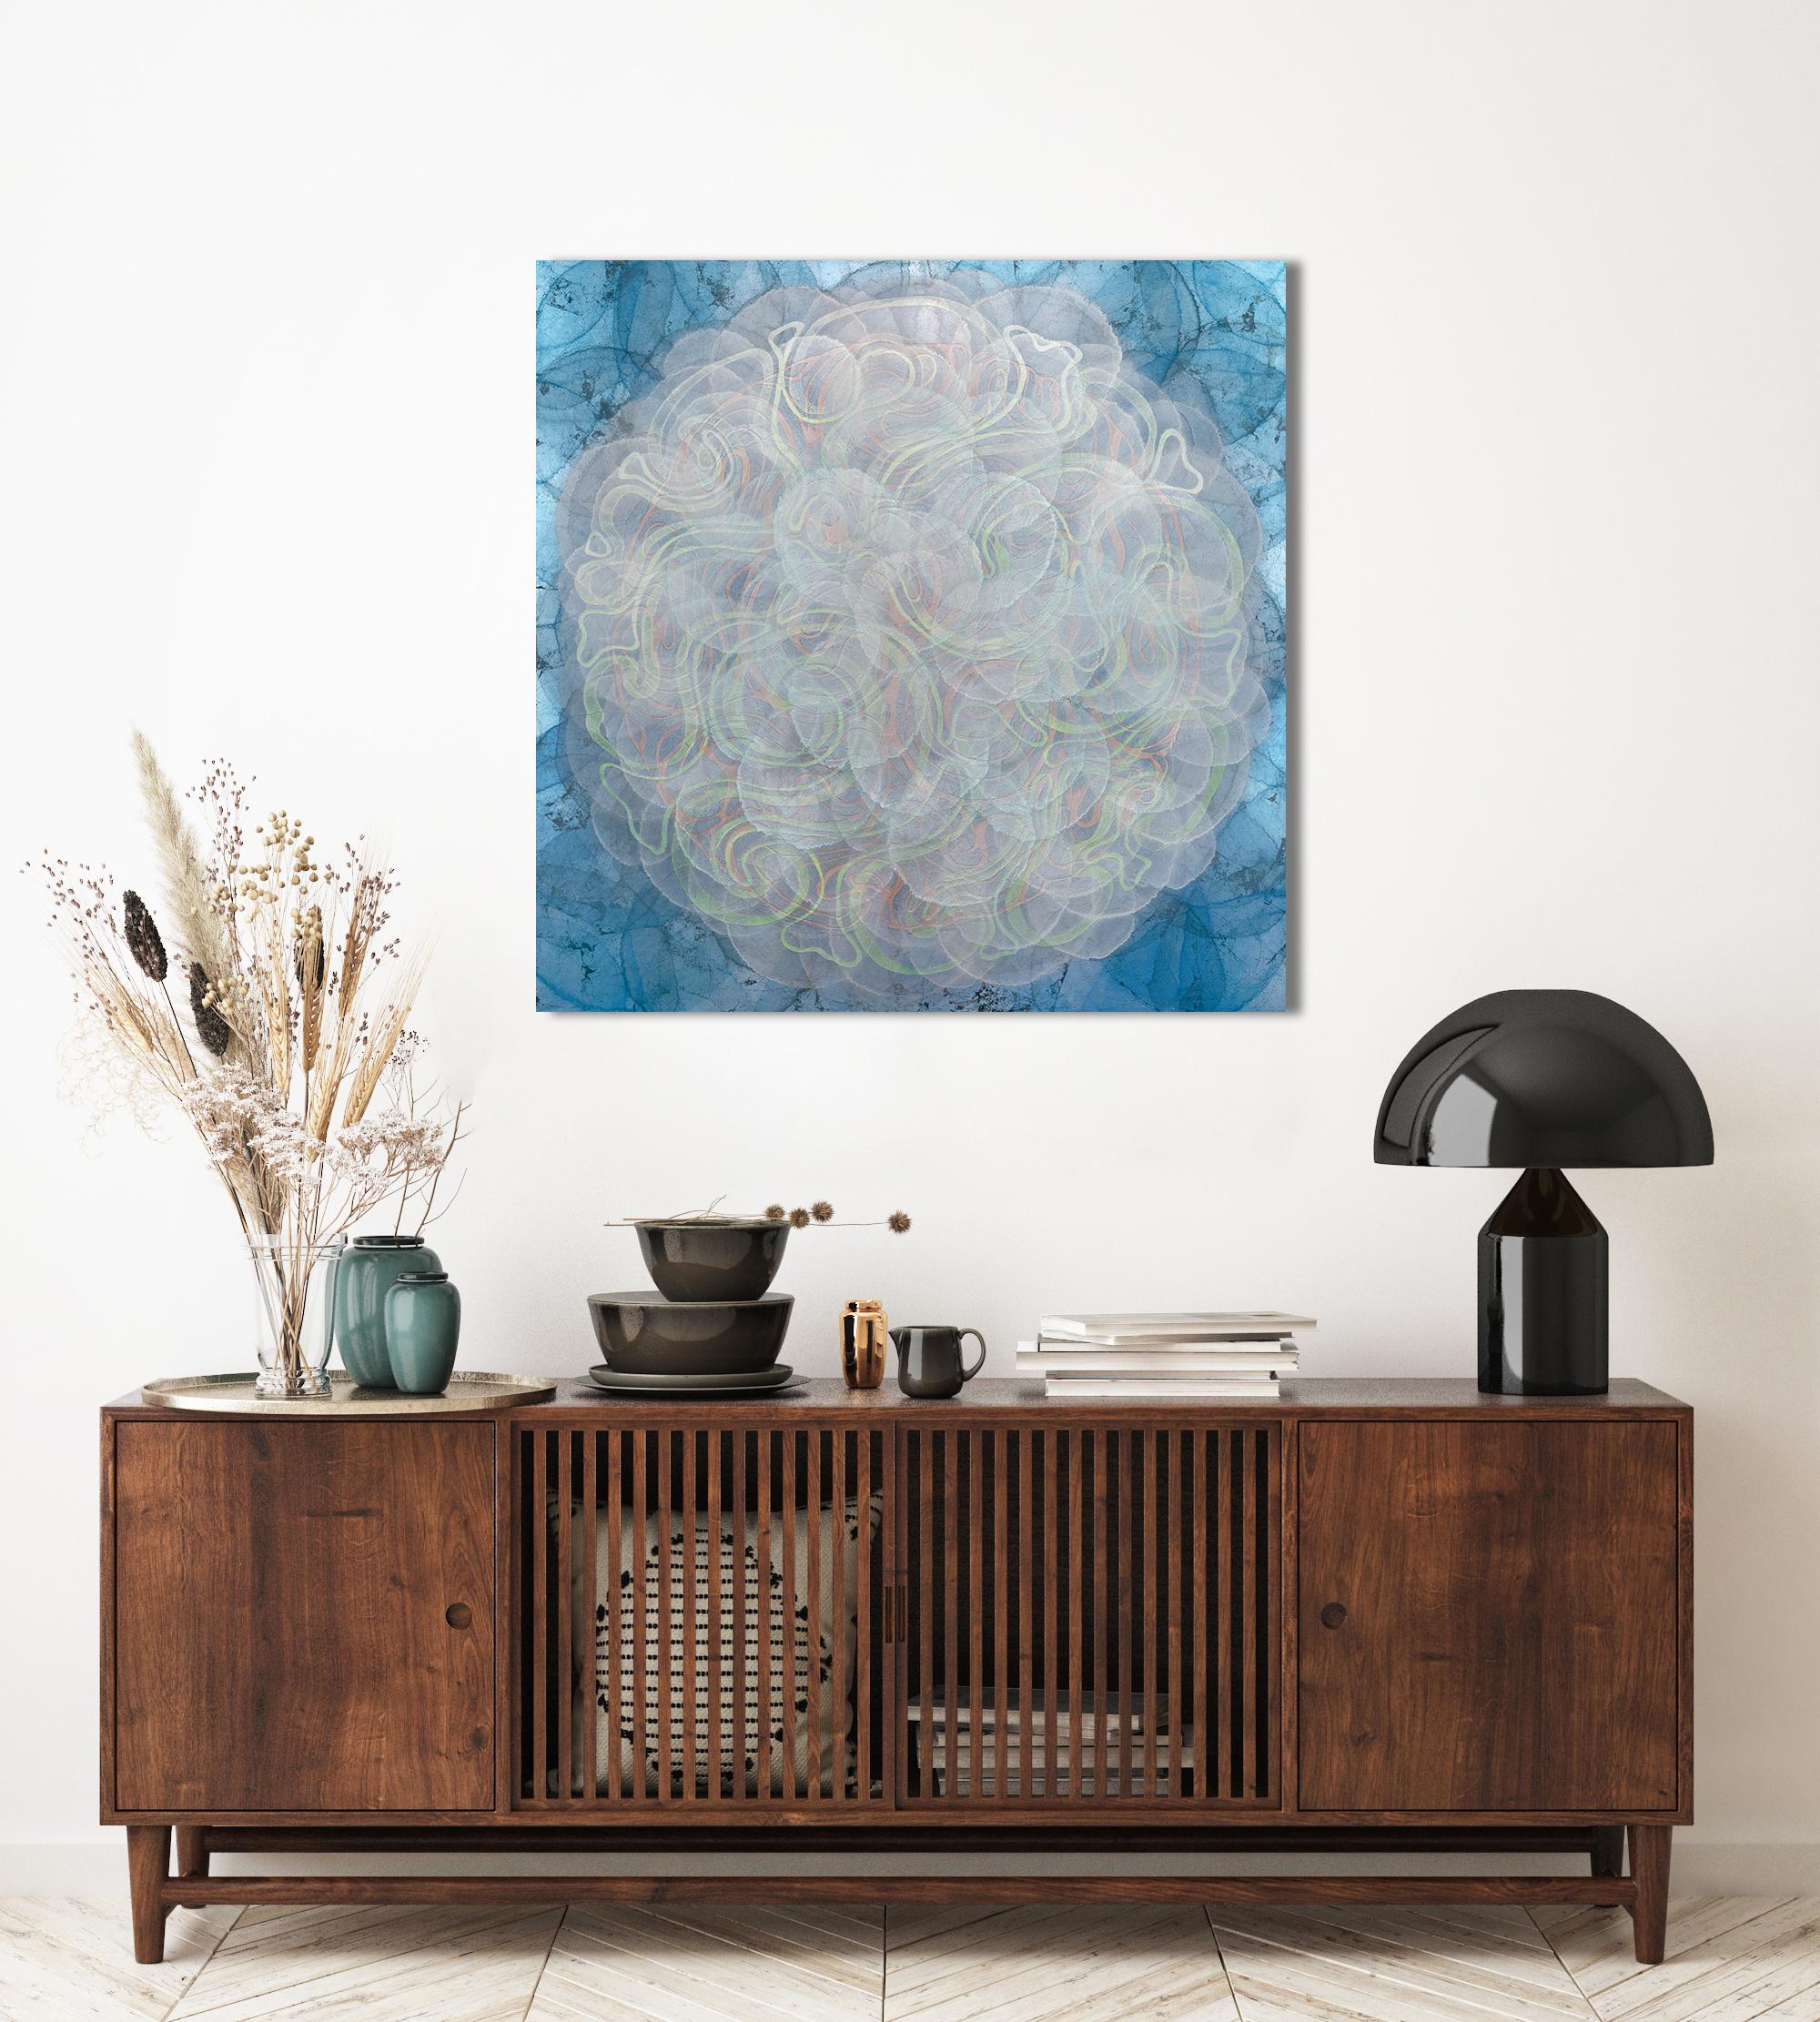 This abstract painting by Roger Mudre is made with acrylic paint over mica powder and metal leaf on cradled birch panel. It features a large circle shape at the center of the composition, composed of swirling green, orange, and silvery white lines,